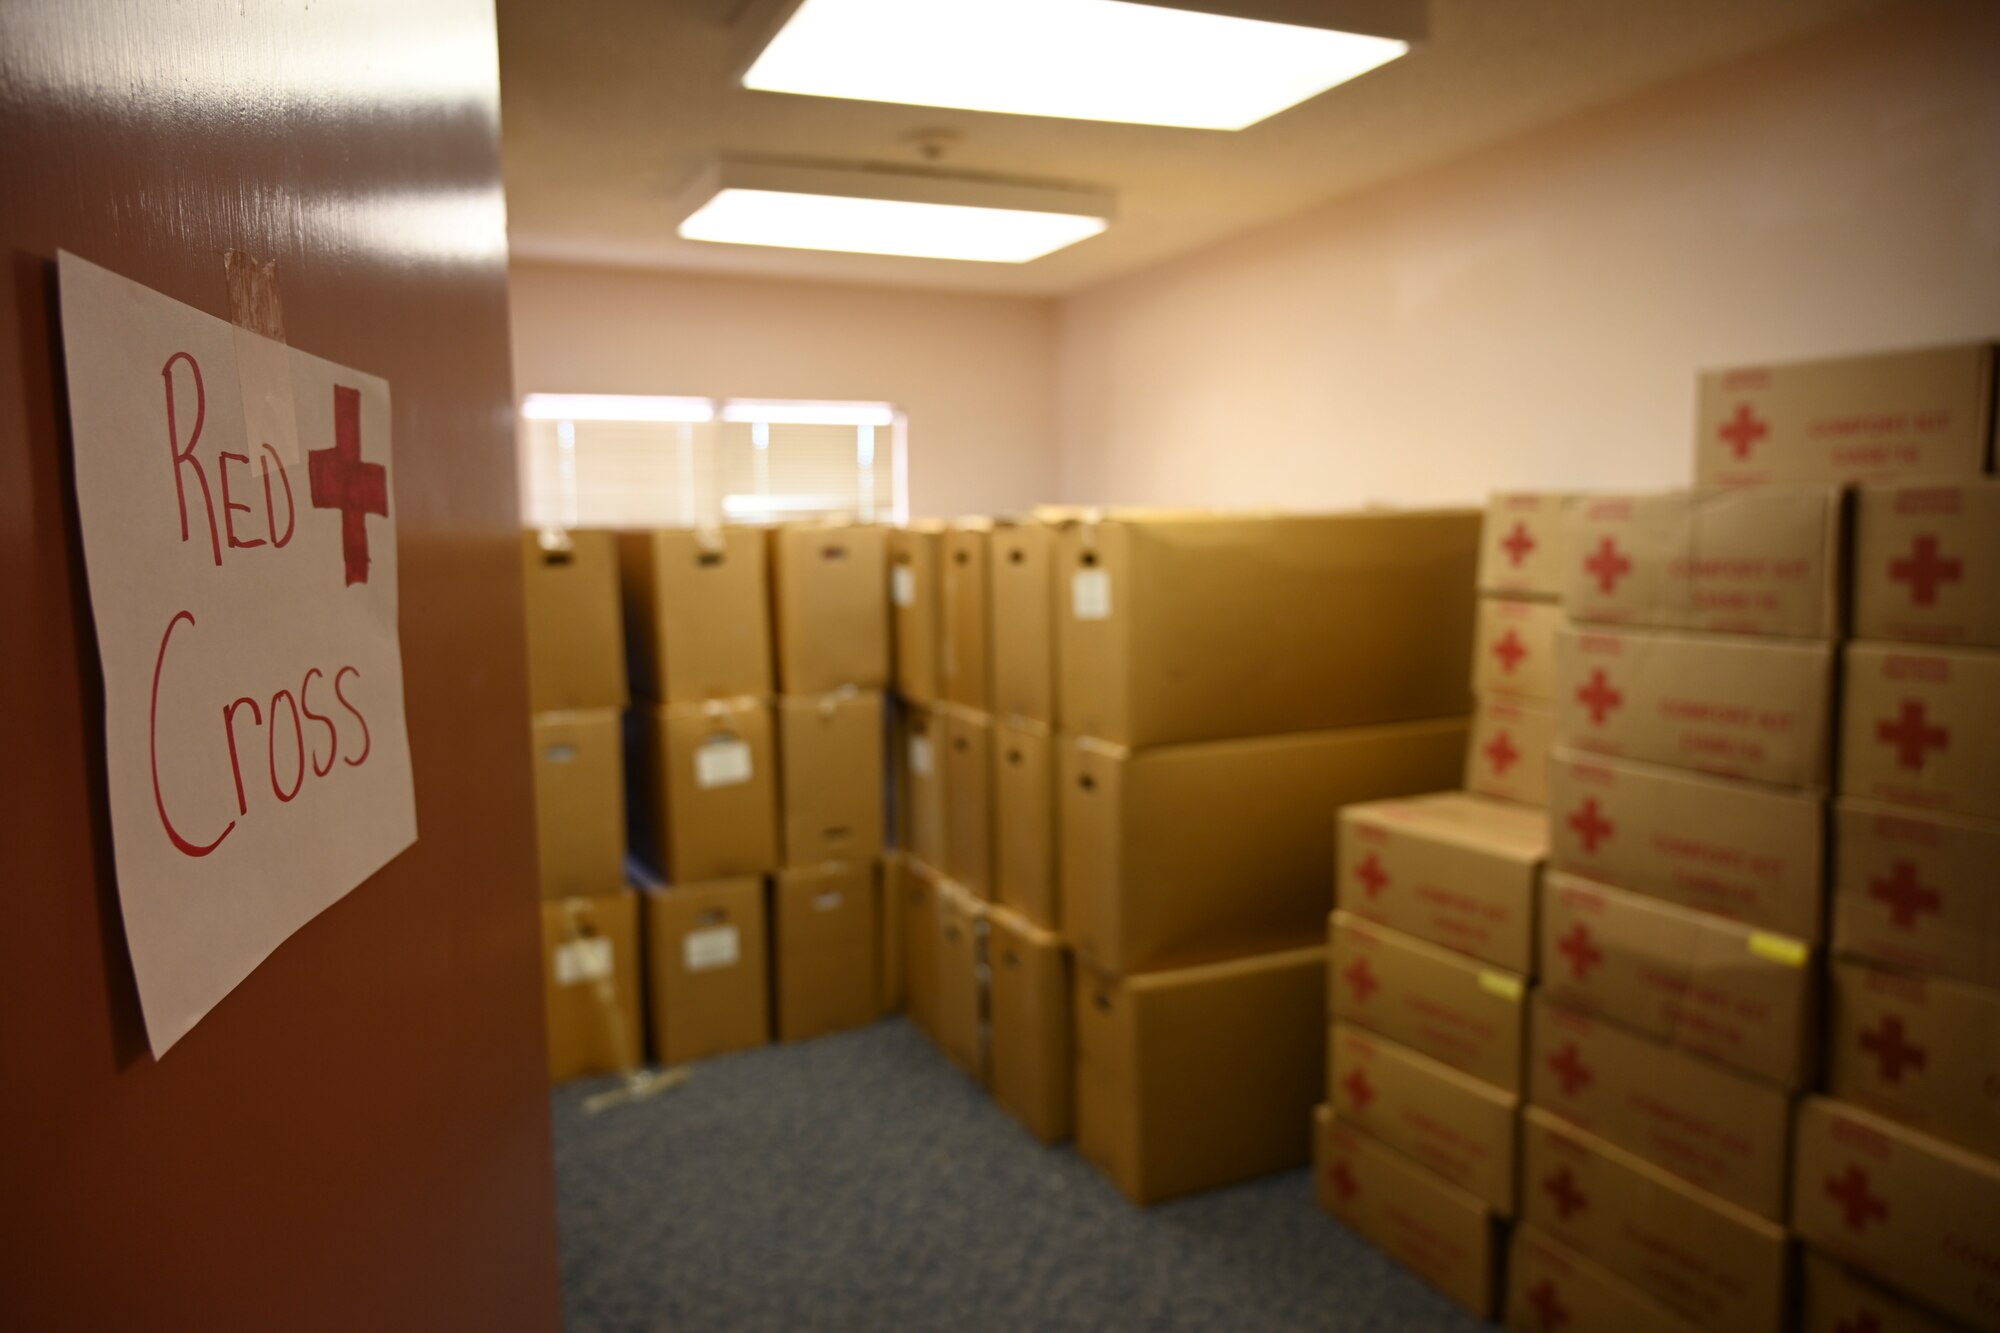 Red Cross donations are stored at the Holloman donation center Sept. 3, 2021 on Holloman Air Force Base, New Mexico. Over 110 tons of donations were collected in approximately nine days to be given to Afghan refugees arriving in support of Operation Allies Welcome. The Department of Defense, through U.S. Northern Command, and in support of the Department of Homeland Security, is providing transportation, temporary housing, medical screening, and general support for up to 50,000 Afghan evacuees at suitable facilities, in permanent or temporary structures, as quickly as possible. This initiative provides Afghan personnel essential support at secure locations outside Afghanistan. (U.S. Air Force photo by Airman 1st Class Adrian Salazar)